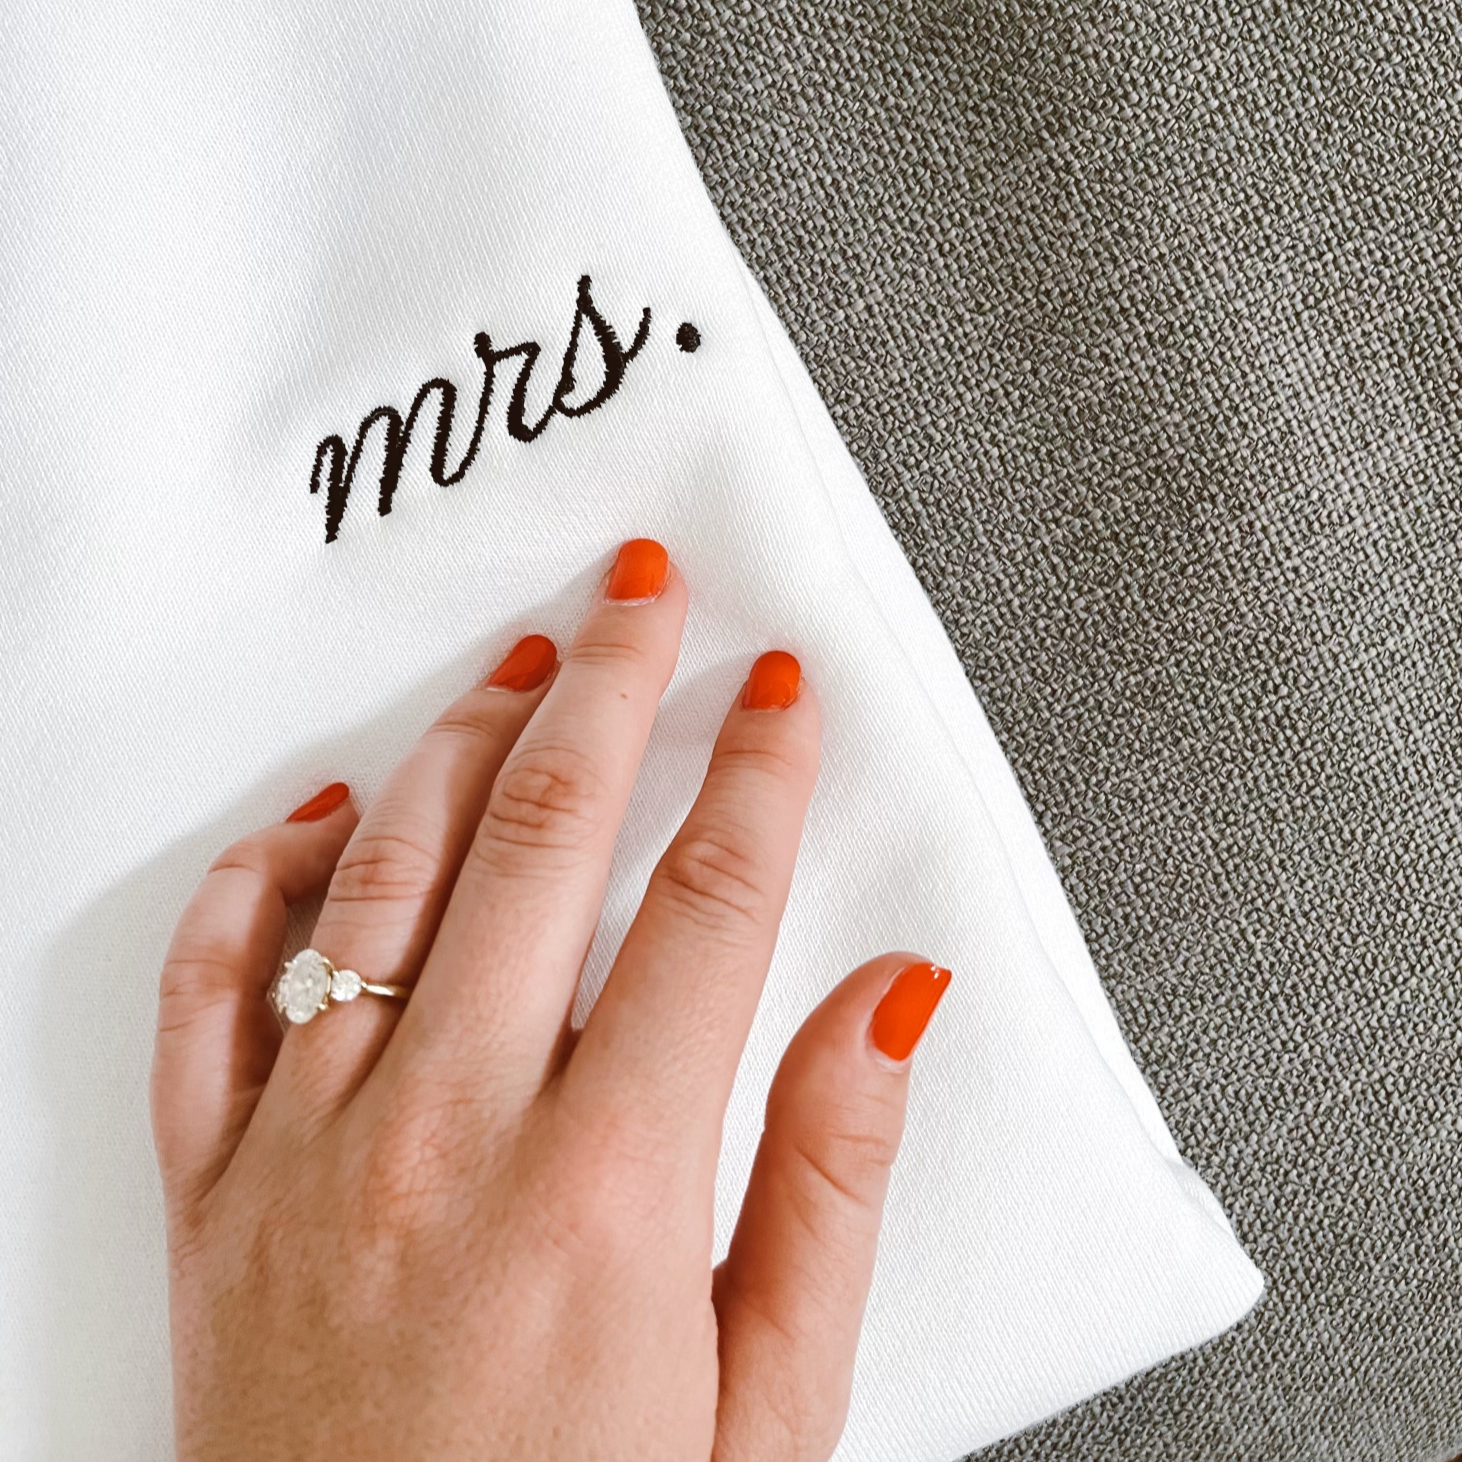 Hand with engagement ring resting on white Mrs. sweatshirt.